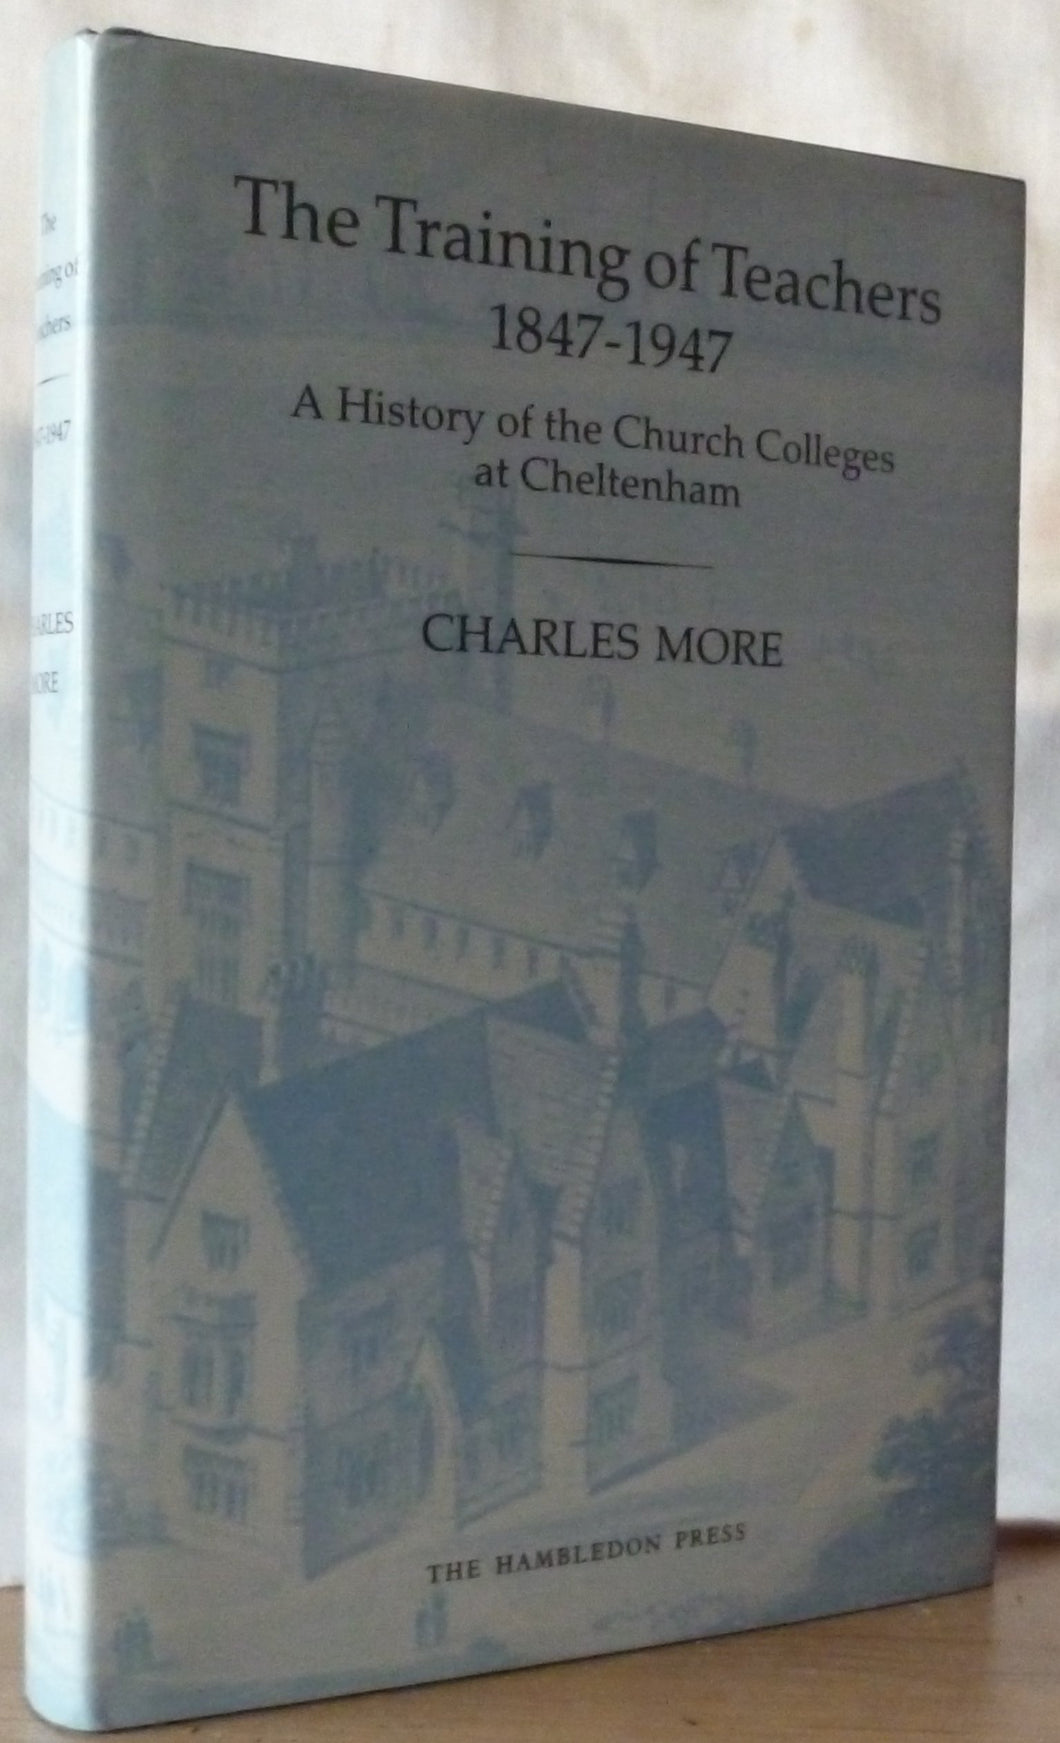 The Training of Teachers, 1847-1947: History of the Church Colleges at Cheltenham More, Charles